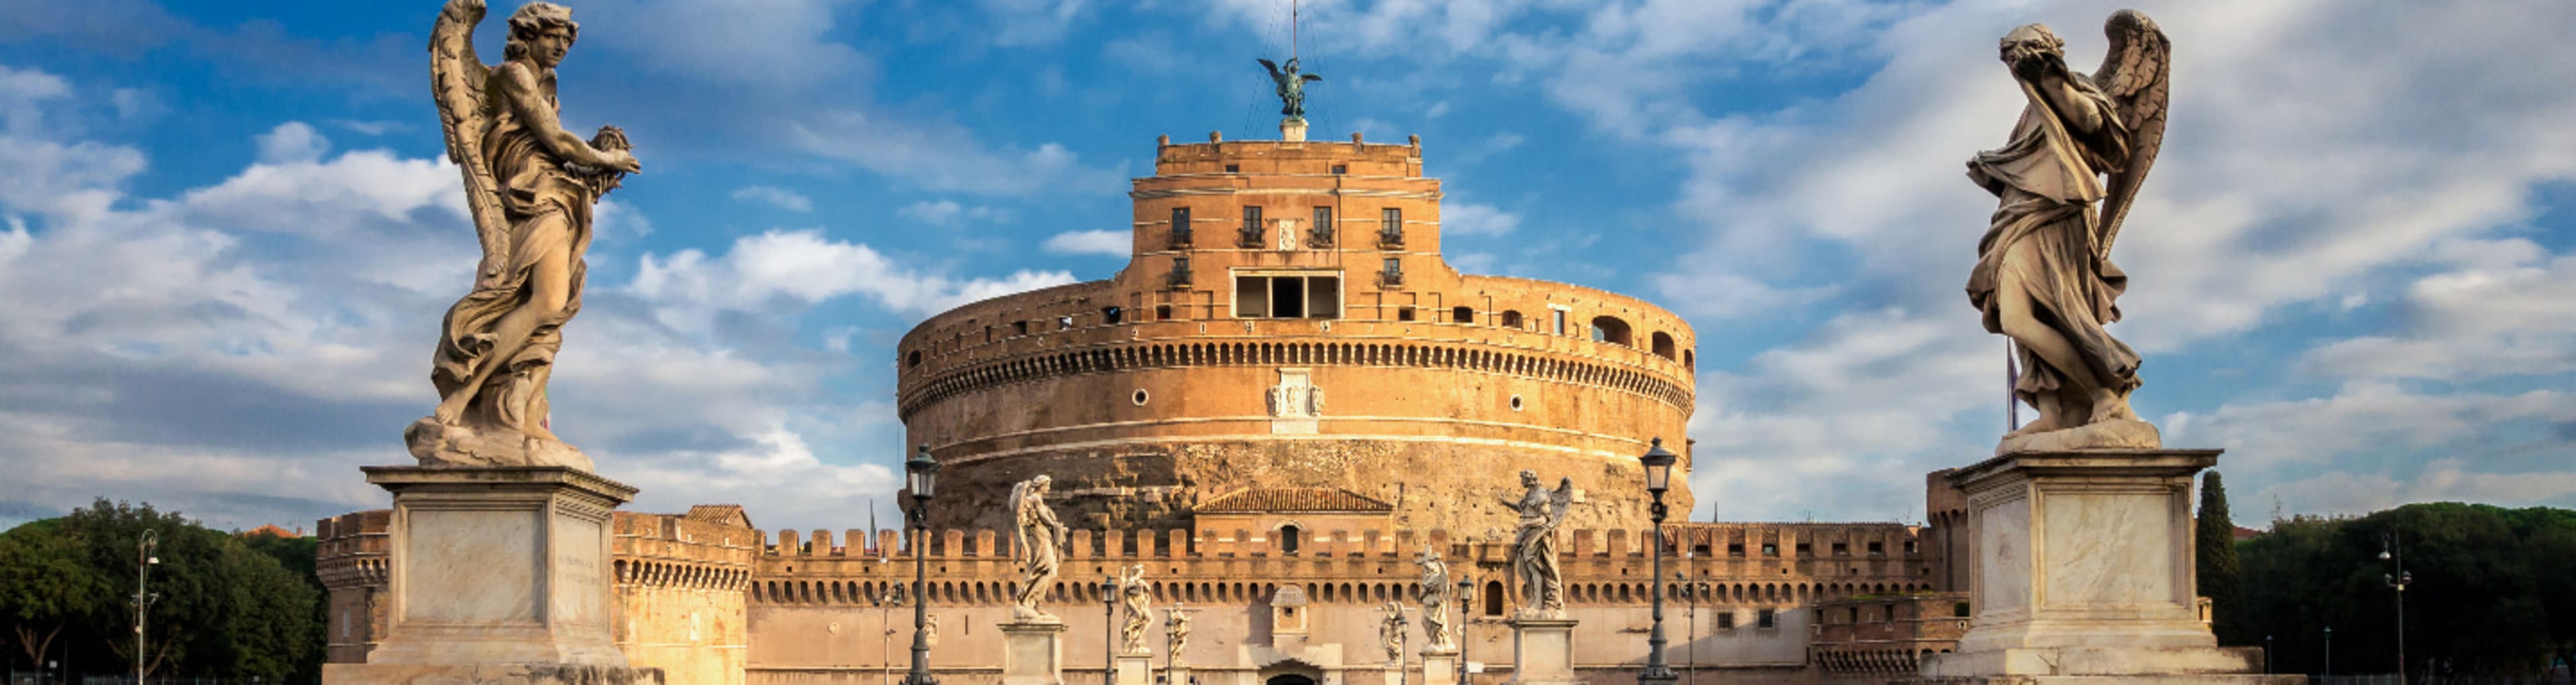 Rome's Castel Sant'Angelo viewed from Ponte Sant'Angelo